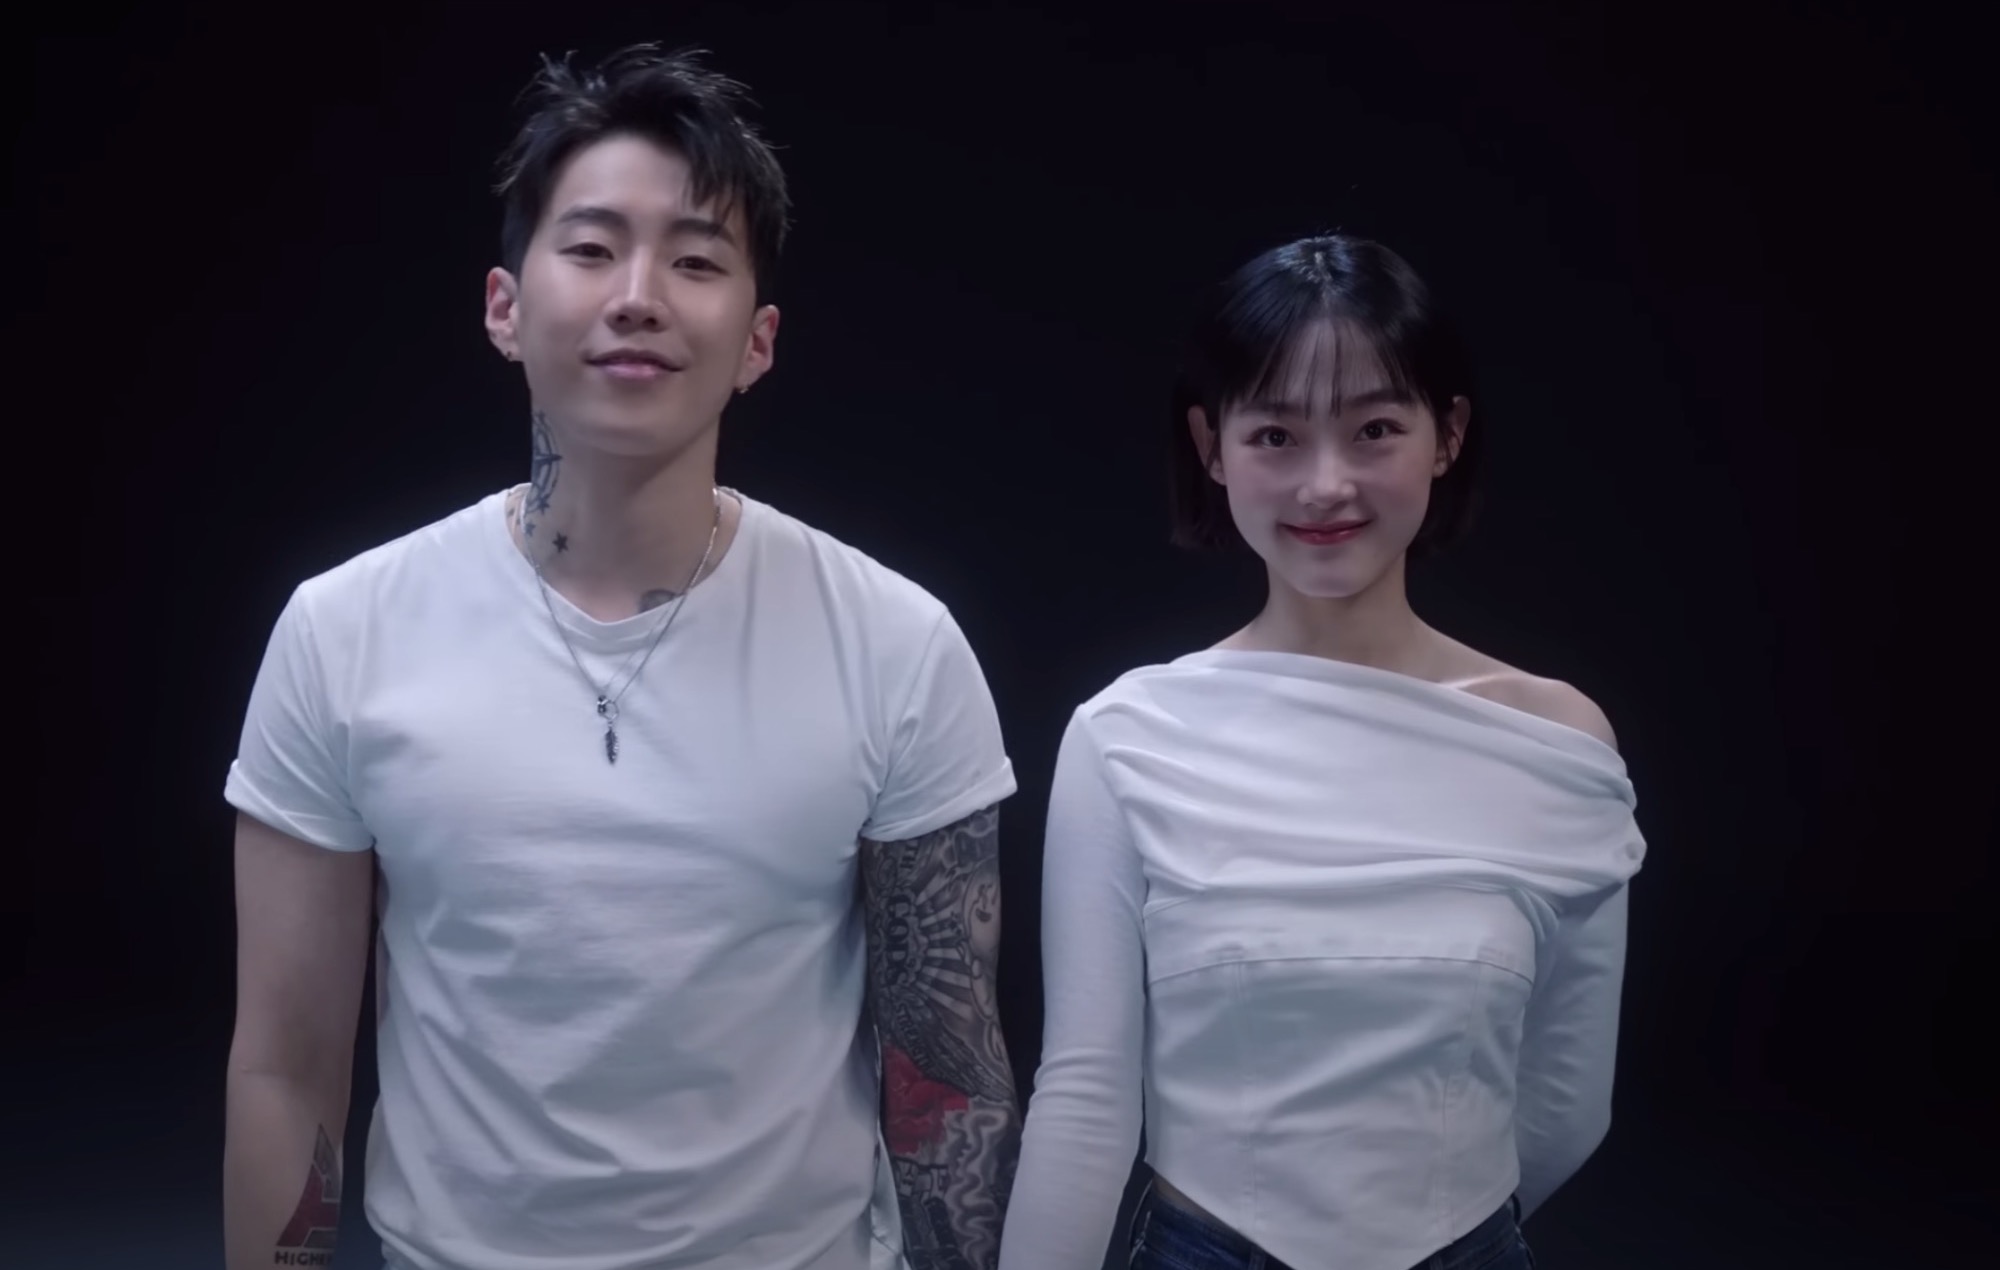 Jay Park releases music video for ‘Yesterday’ starring ‘Squid Game’ actress Lee Yoo-mi